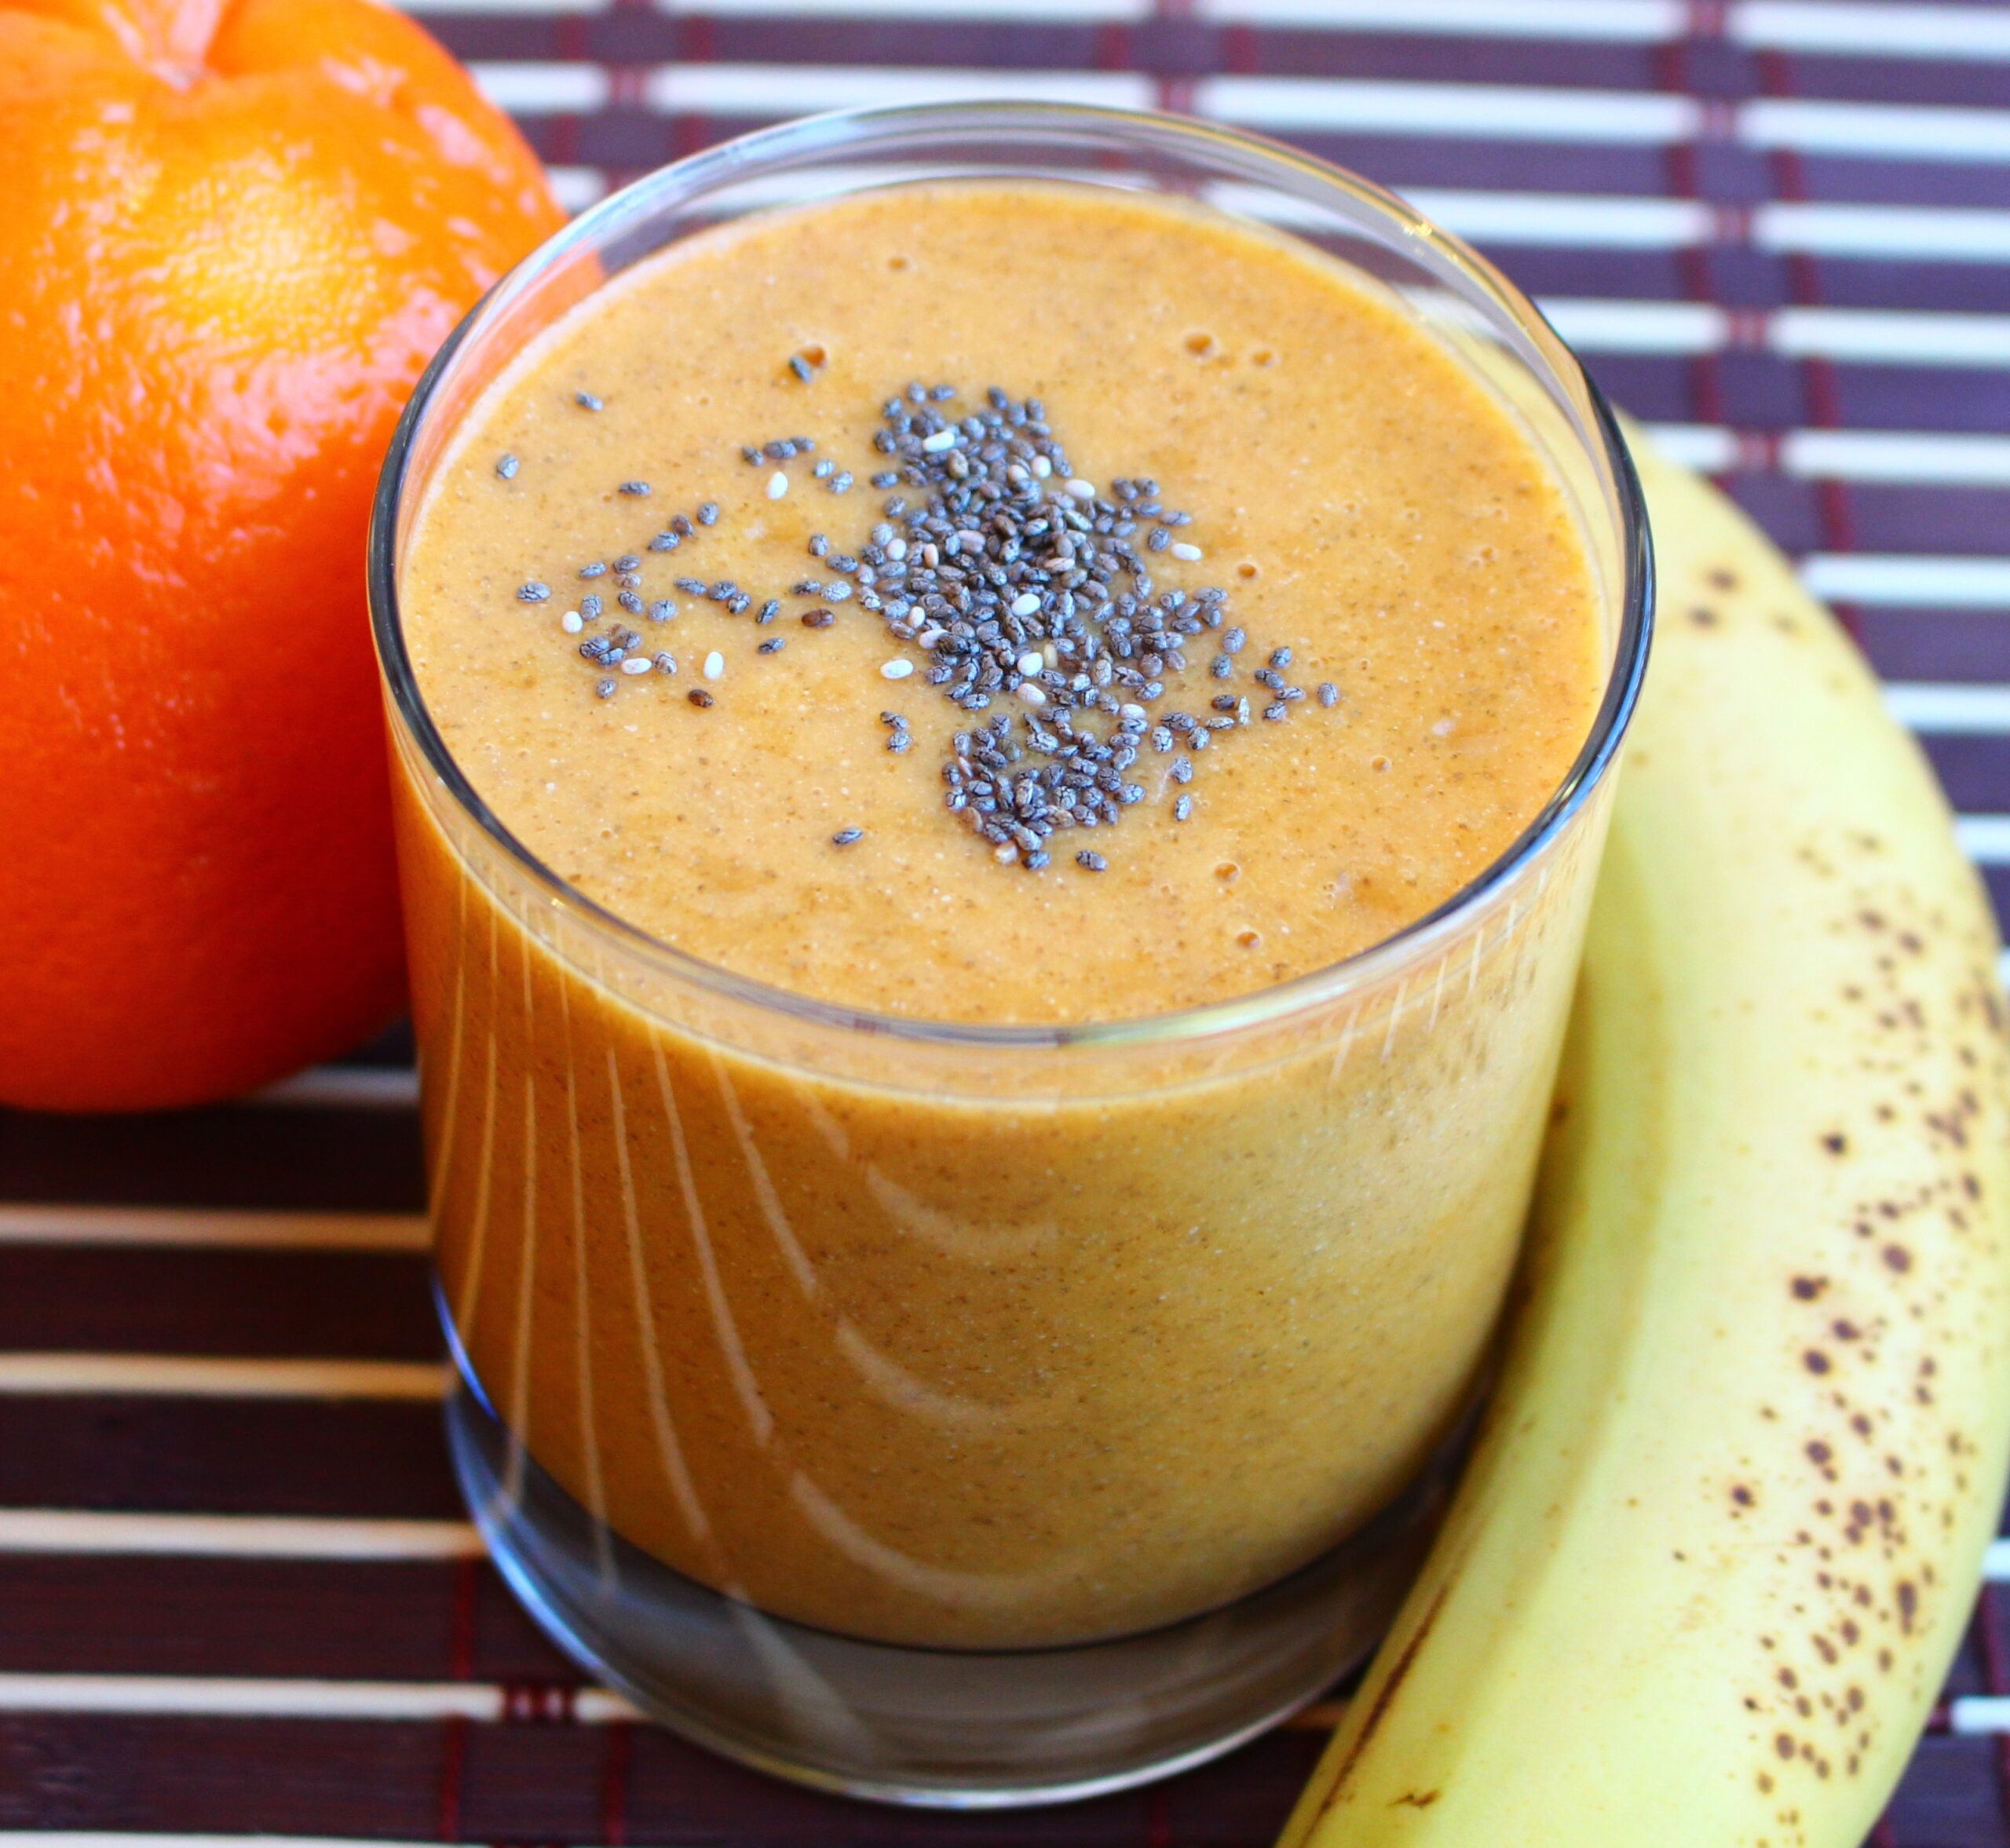 Banana and orange with smoothie chia seeds on top